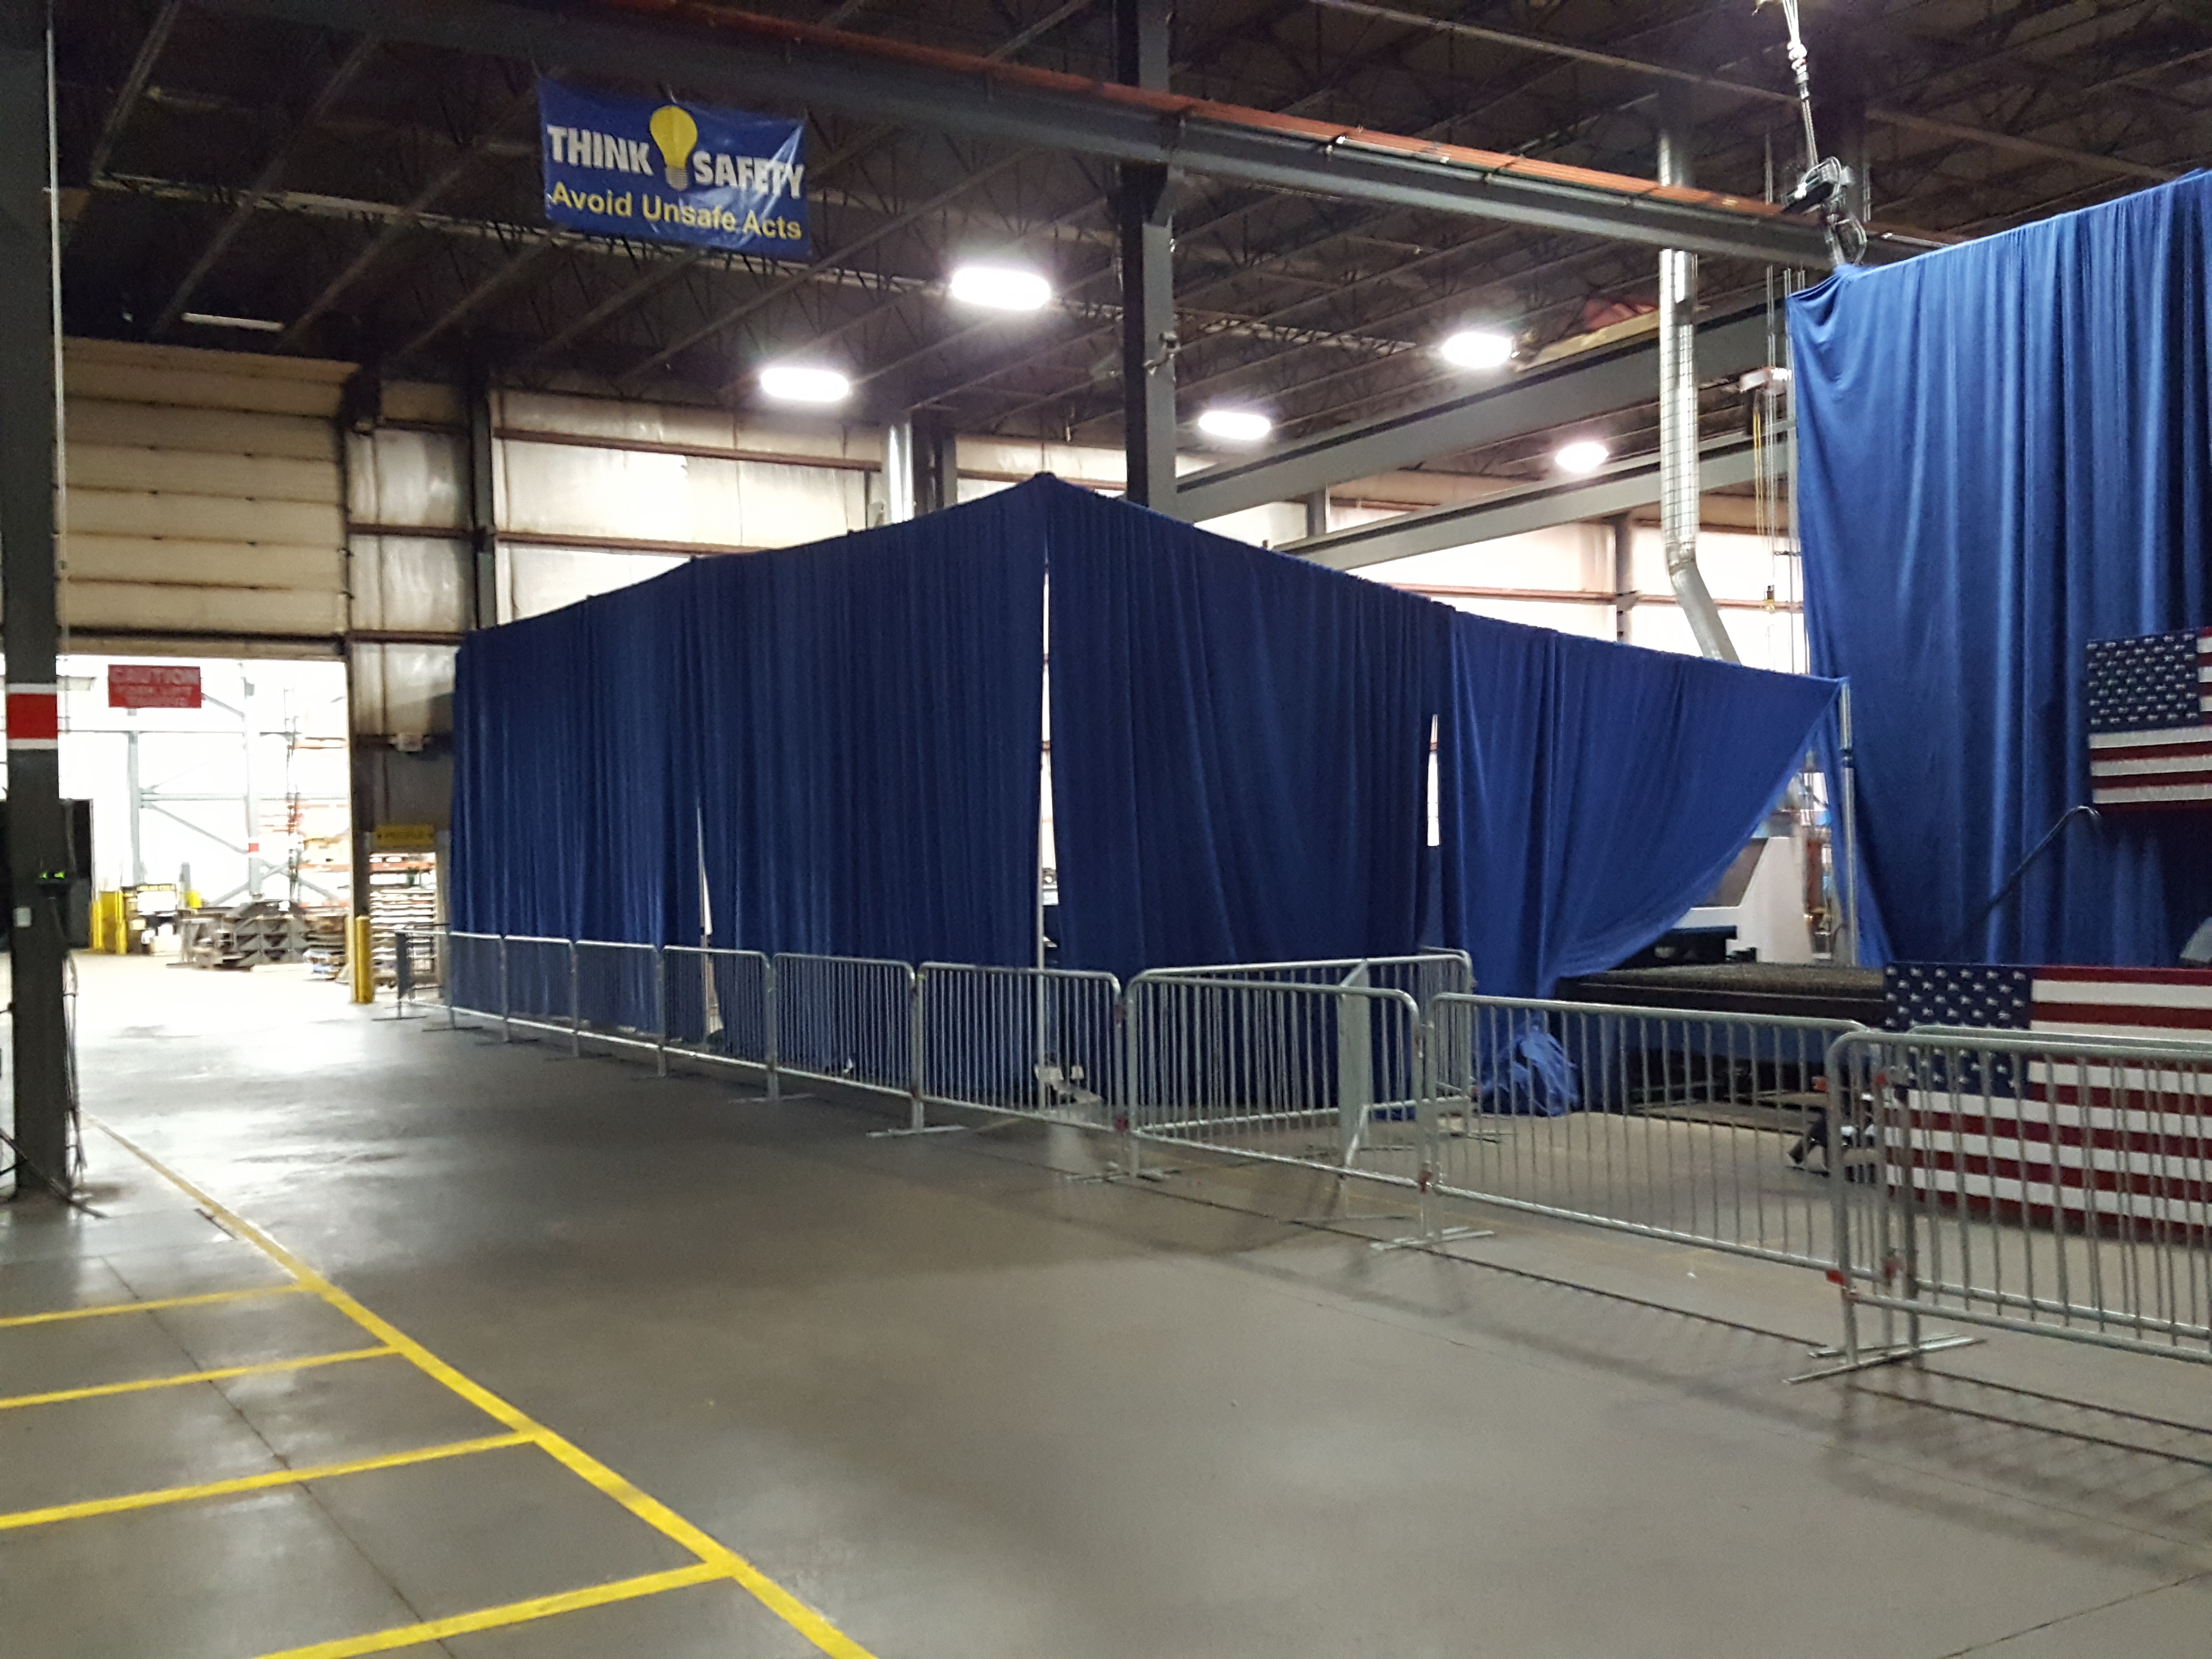 Barricade for political event at Giese Manufacturing being setup